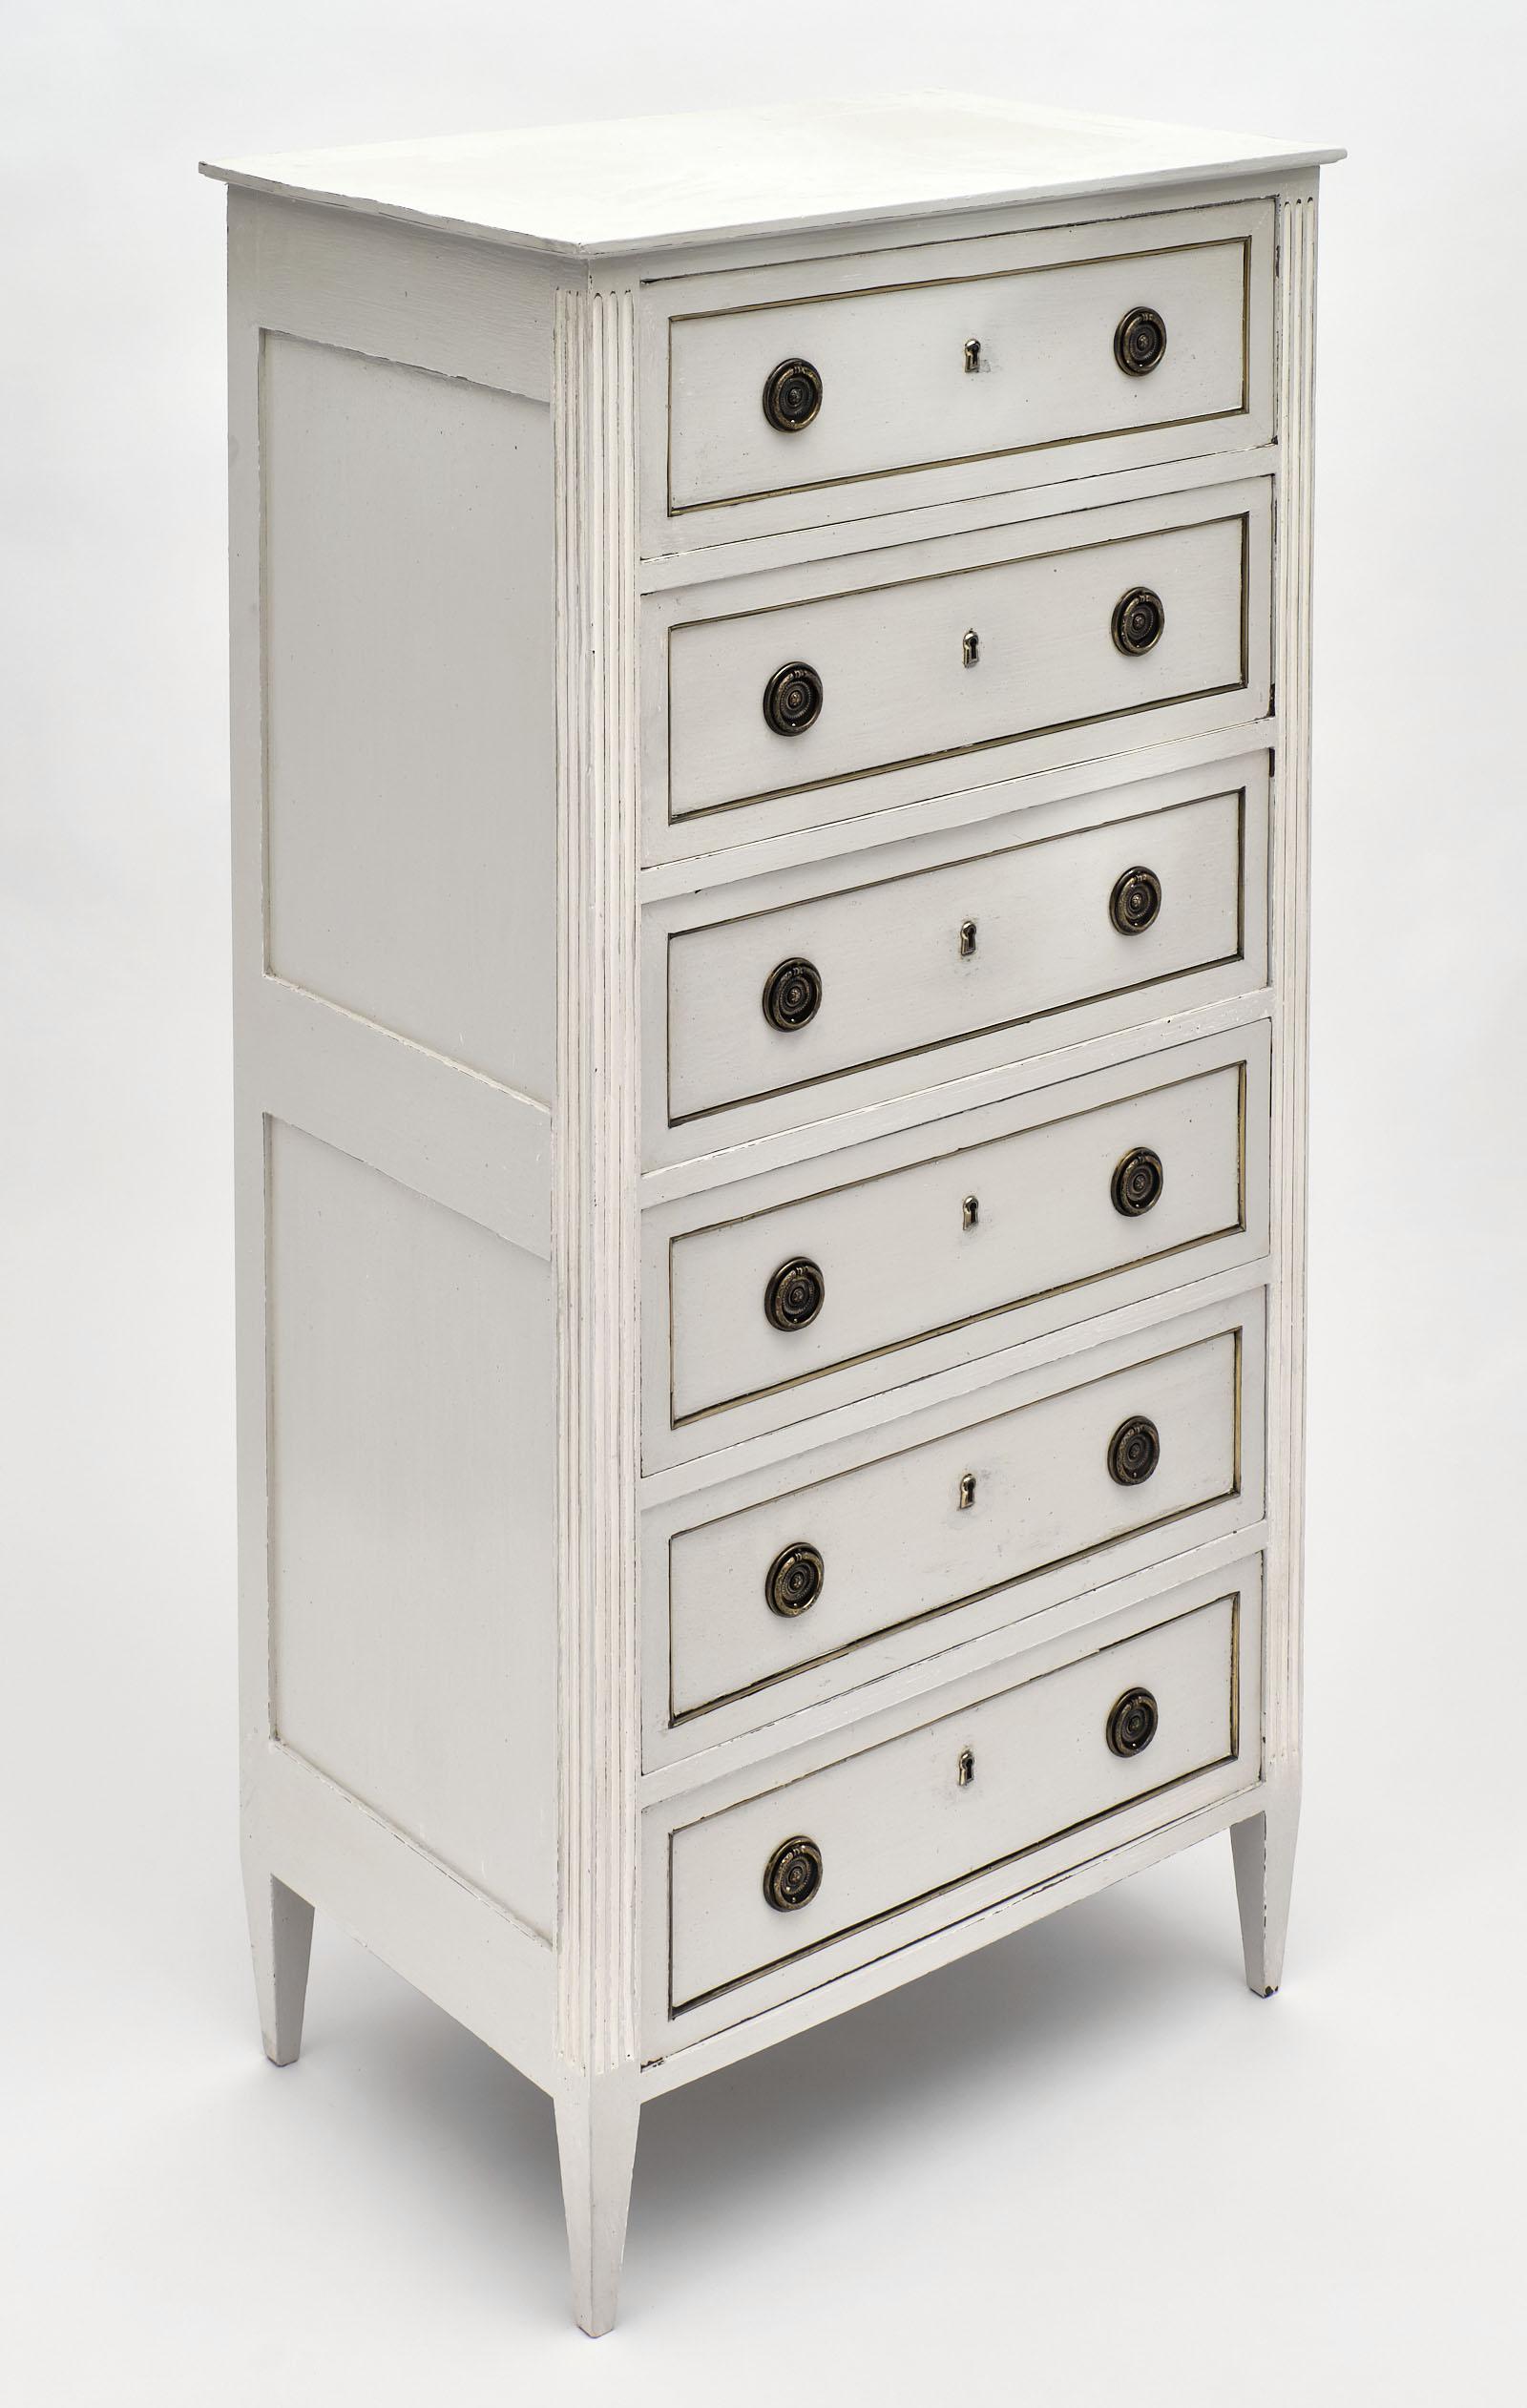 French antique painted semainier in the Louis XVI style. The word “semaine” means week in French, and these cabinets are named for one drawer per day of the week. The hand-painted Trianon gray color combines with white painted accents in the fluting